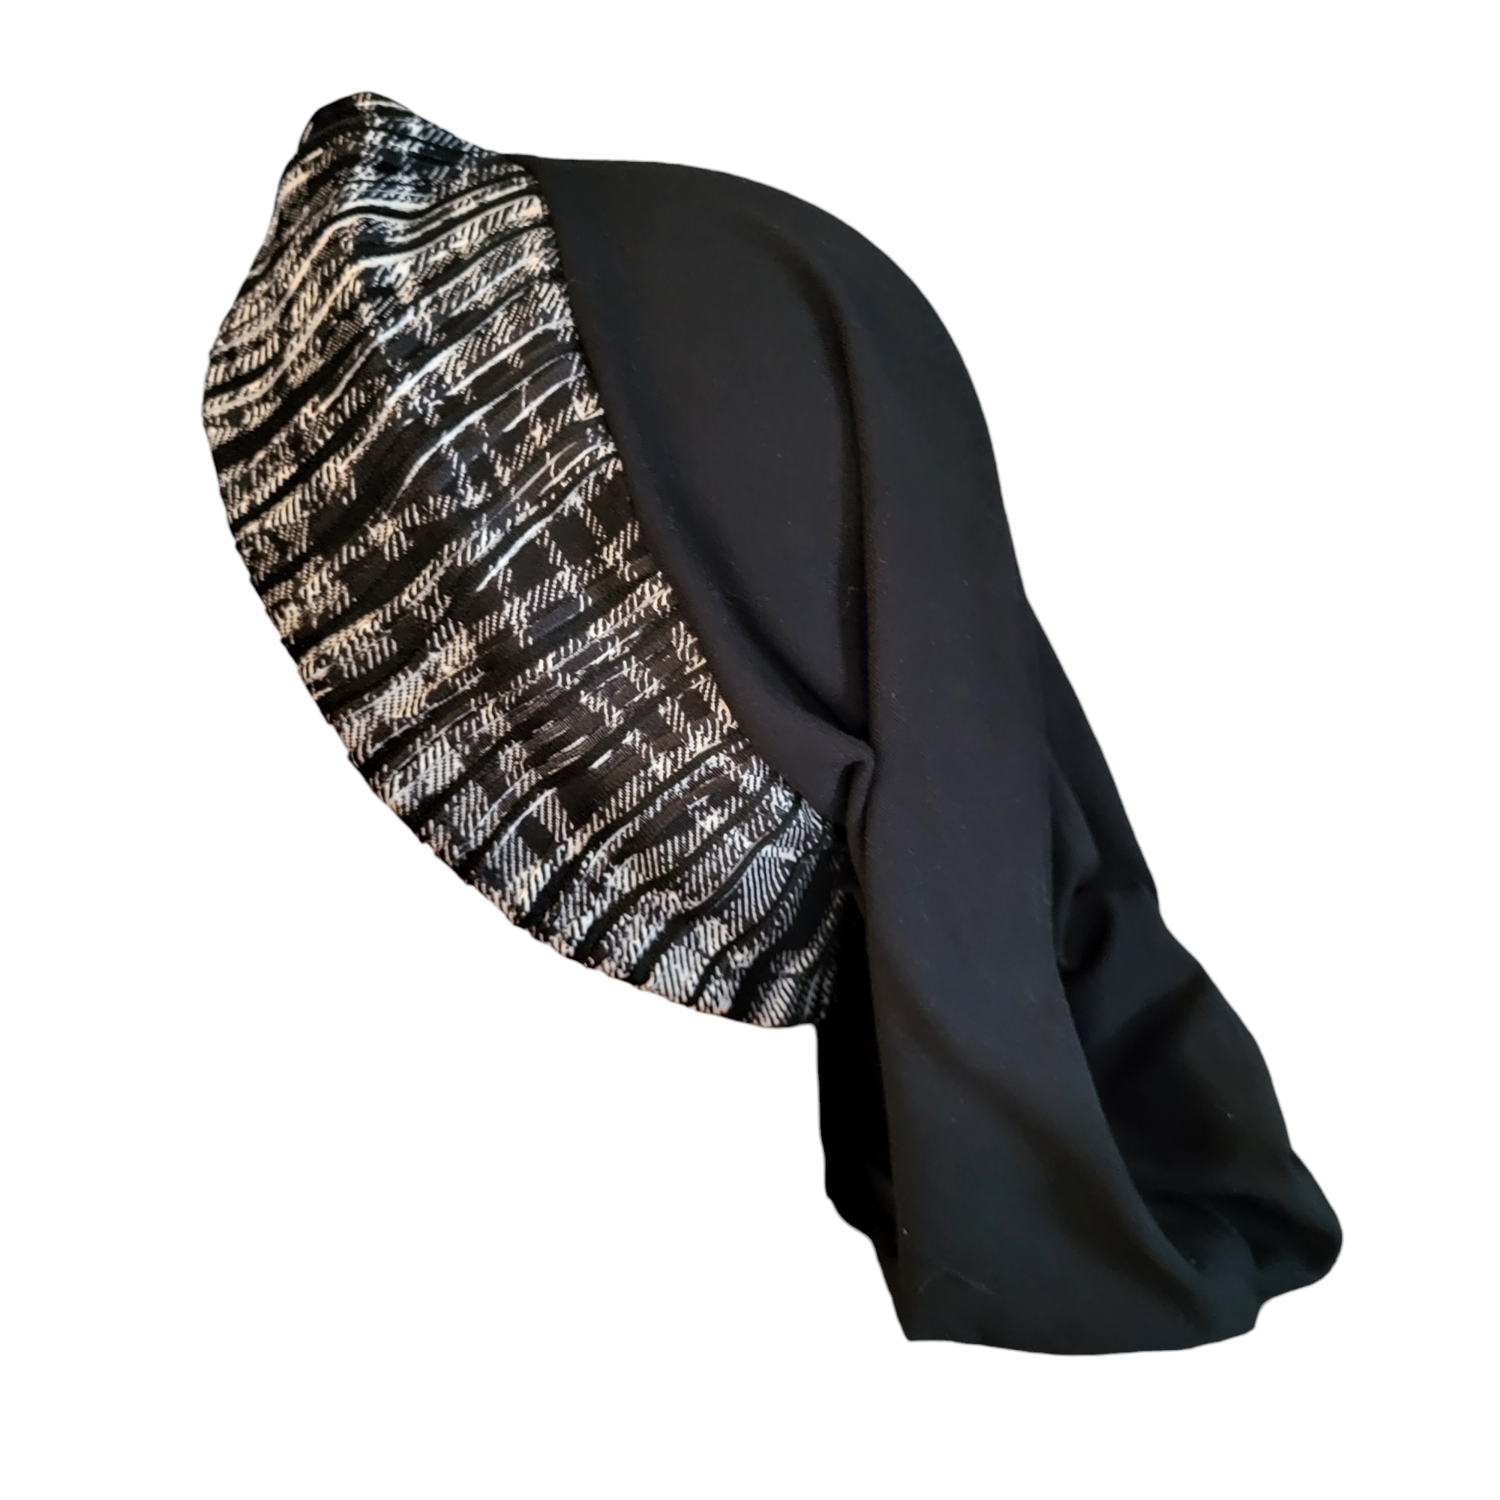 THIN - black knot snood w/ front design #2